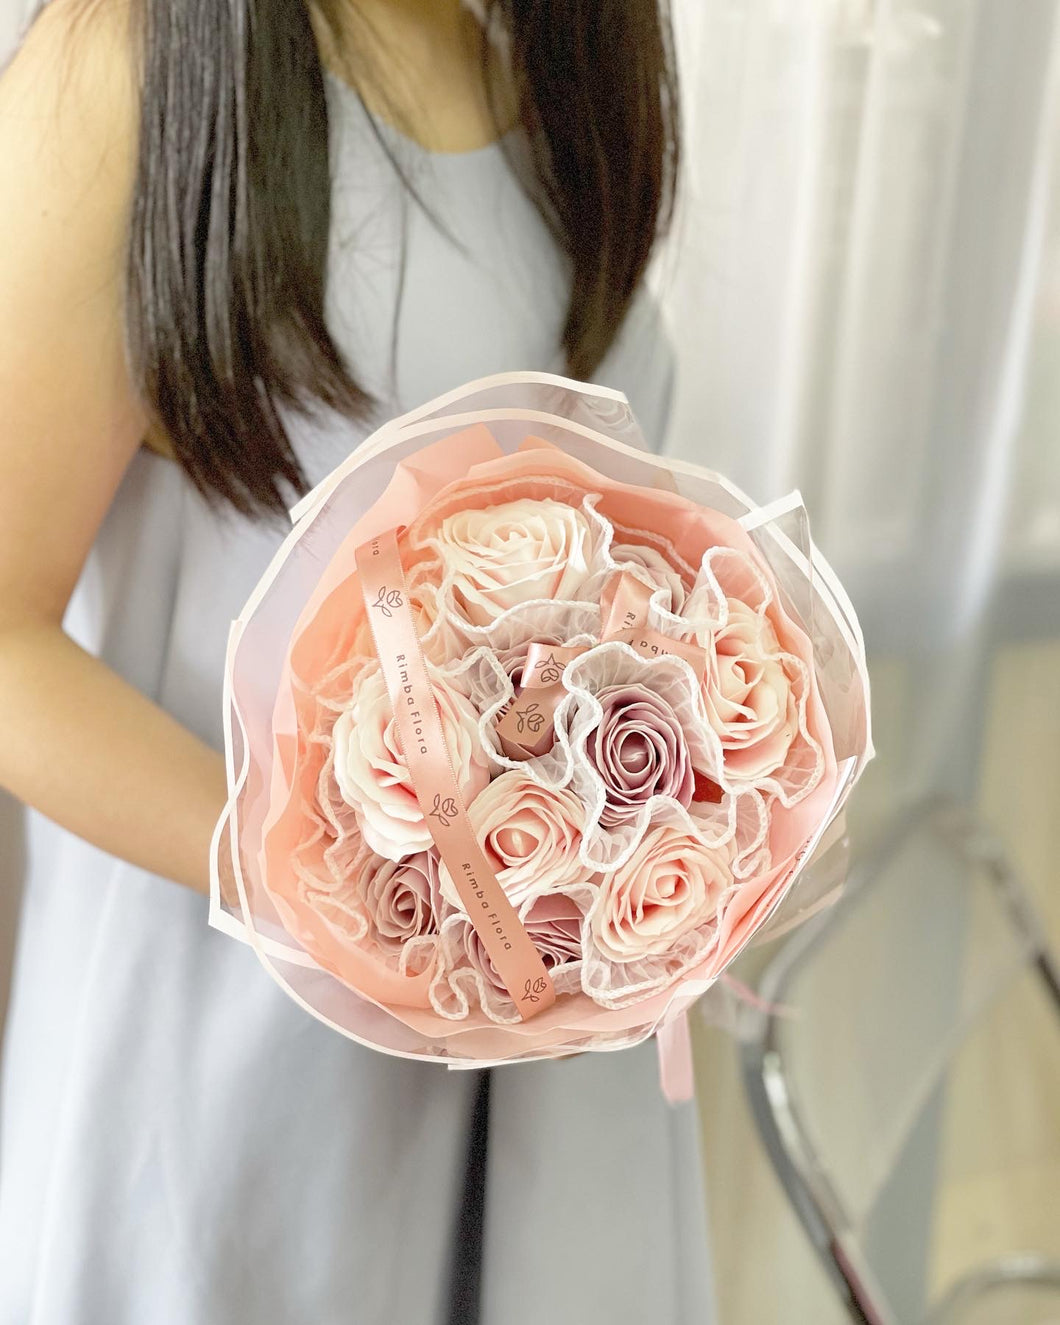 BIGGER ROSE ***RUSSIAN WRAP Everlasting Soap Roses Bouquet To You - Russian Style 12 Roses Fragrance Scent- 12 Ombre Pink